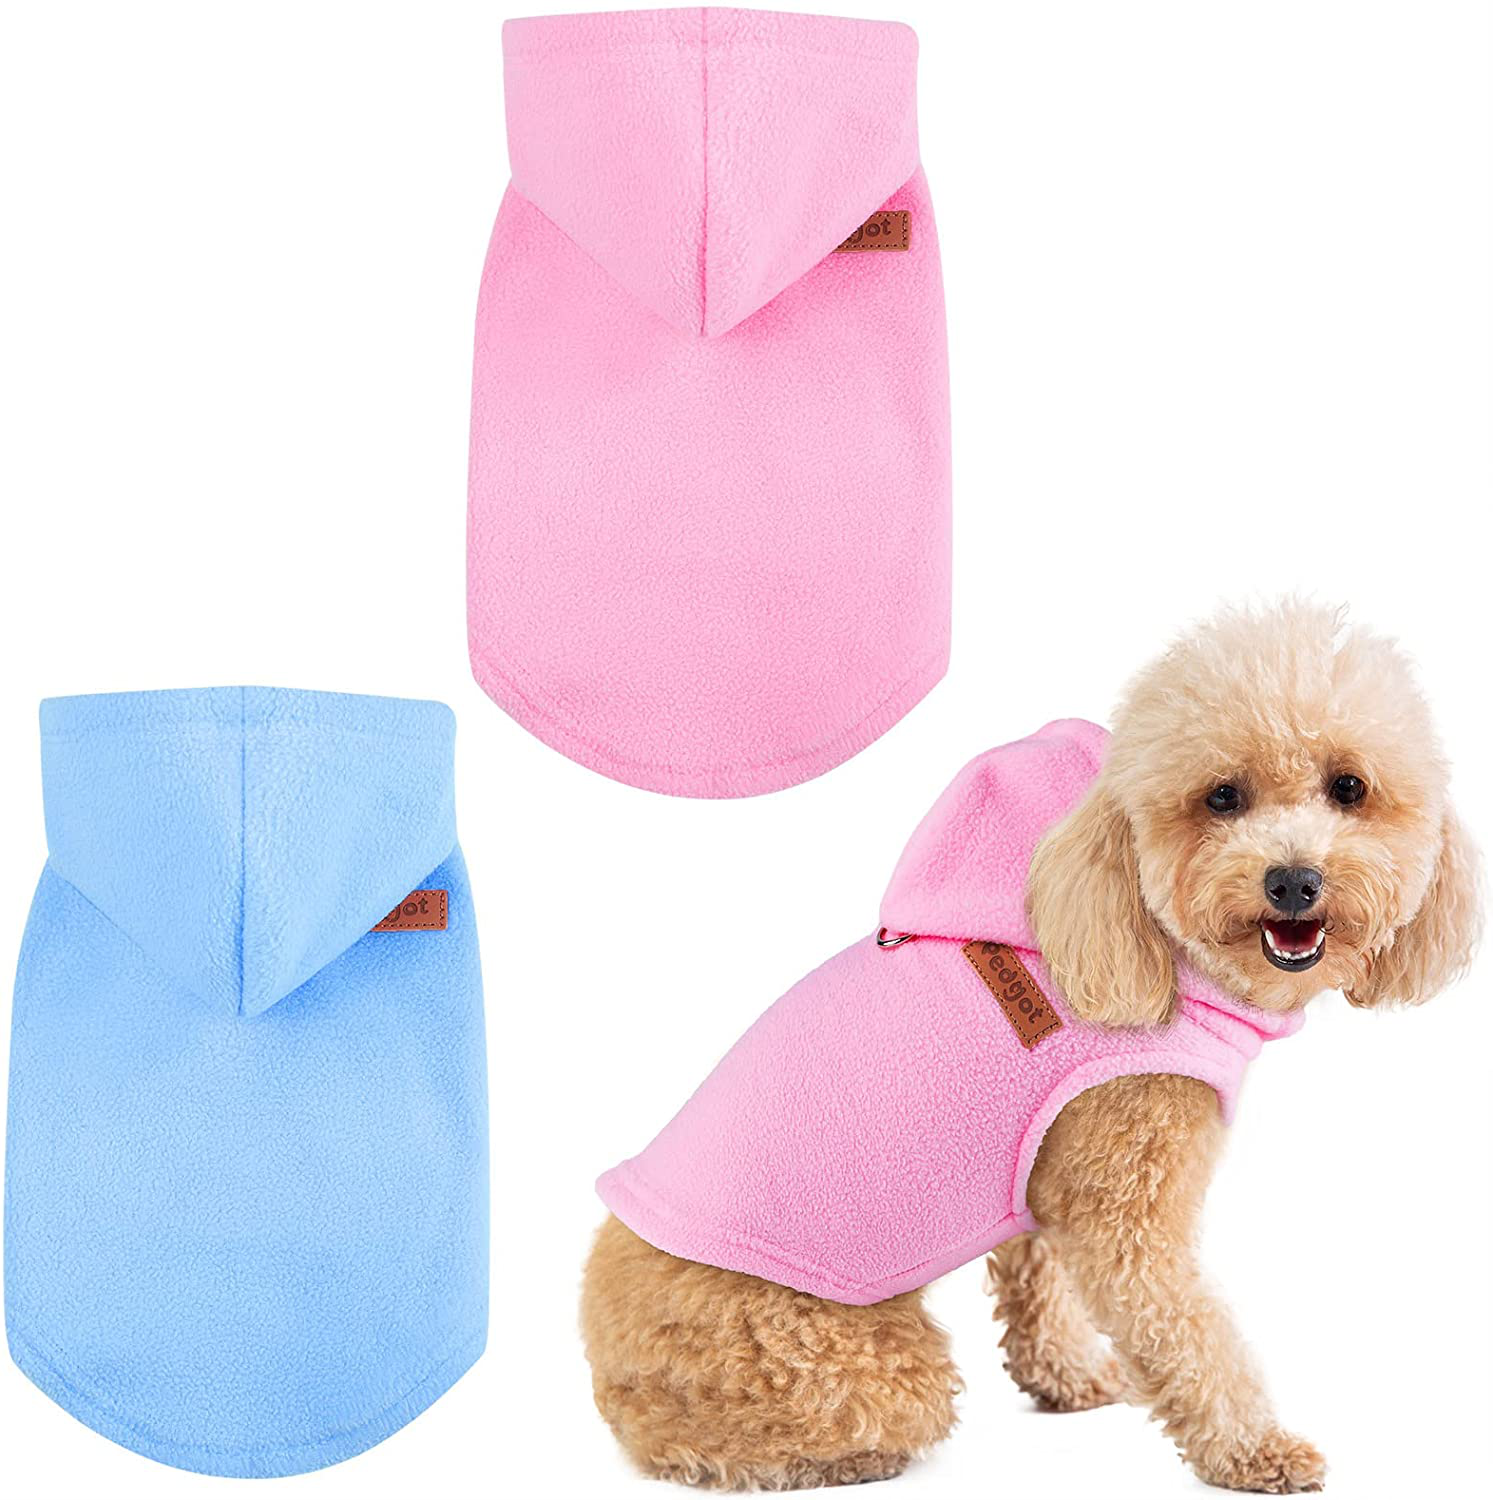 Pedgot 2 Pieces Dog Fleece Vest Hoodie Warm Dog Apparel Clothes Pet Sweater Vest Dog Pullover for Indoor and Outdoor Winter Use